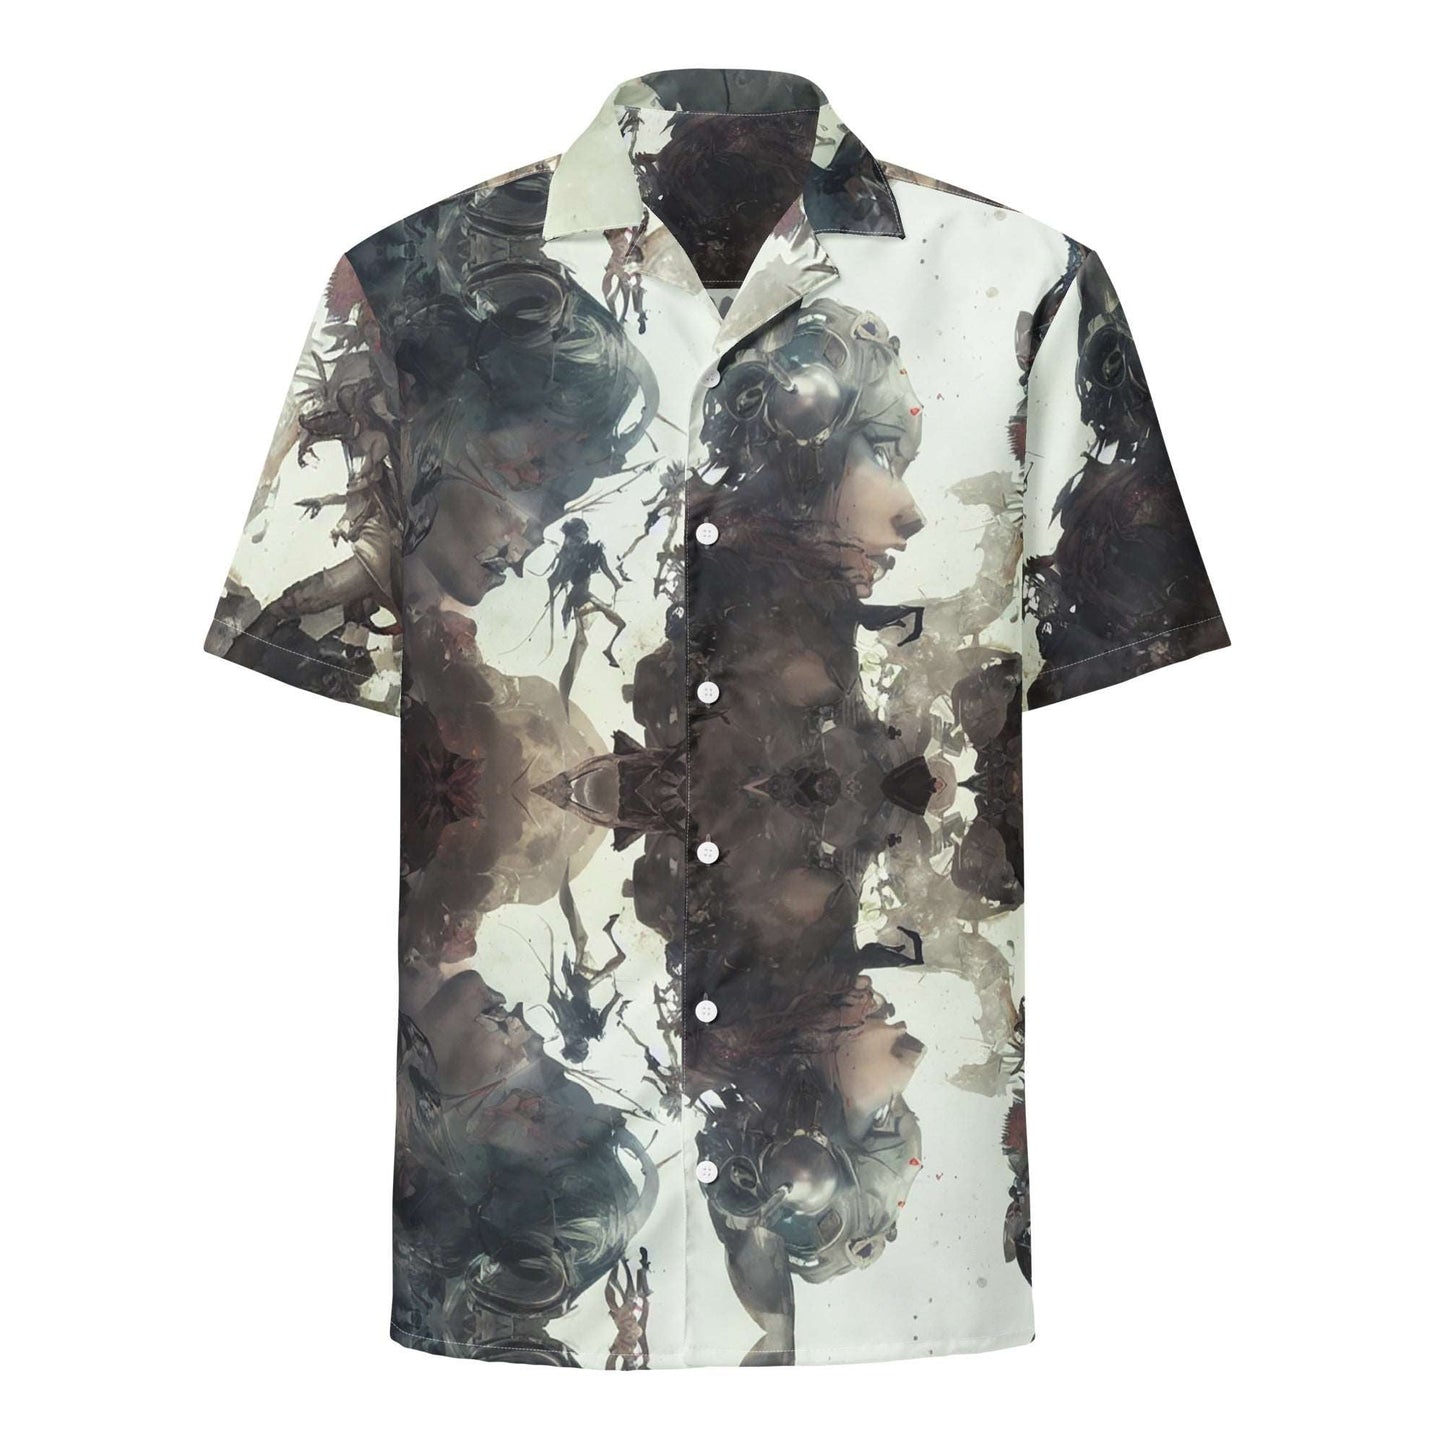 Salome Unisex button shirt - Souled Out World